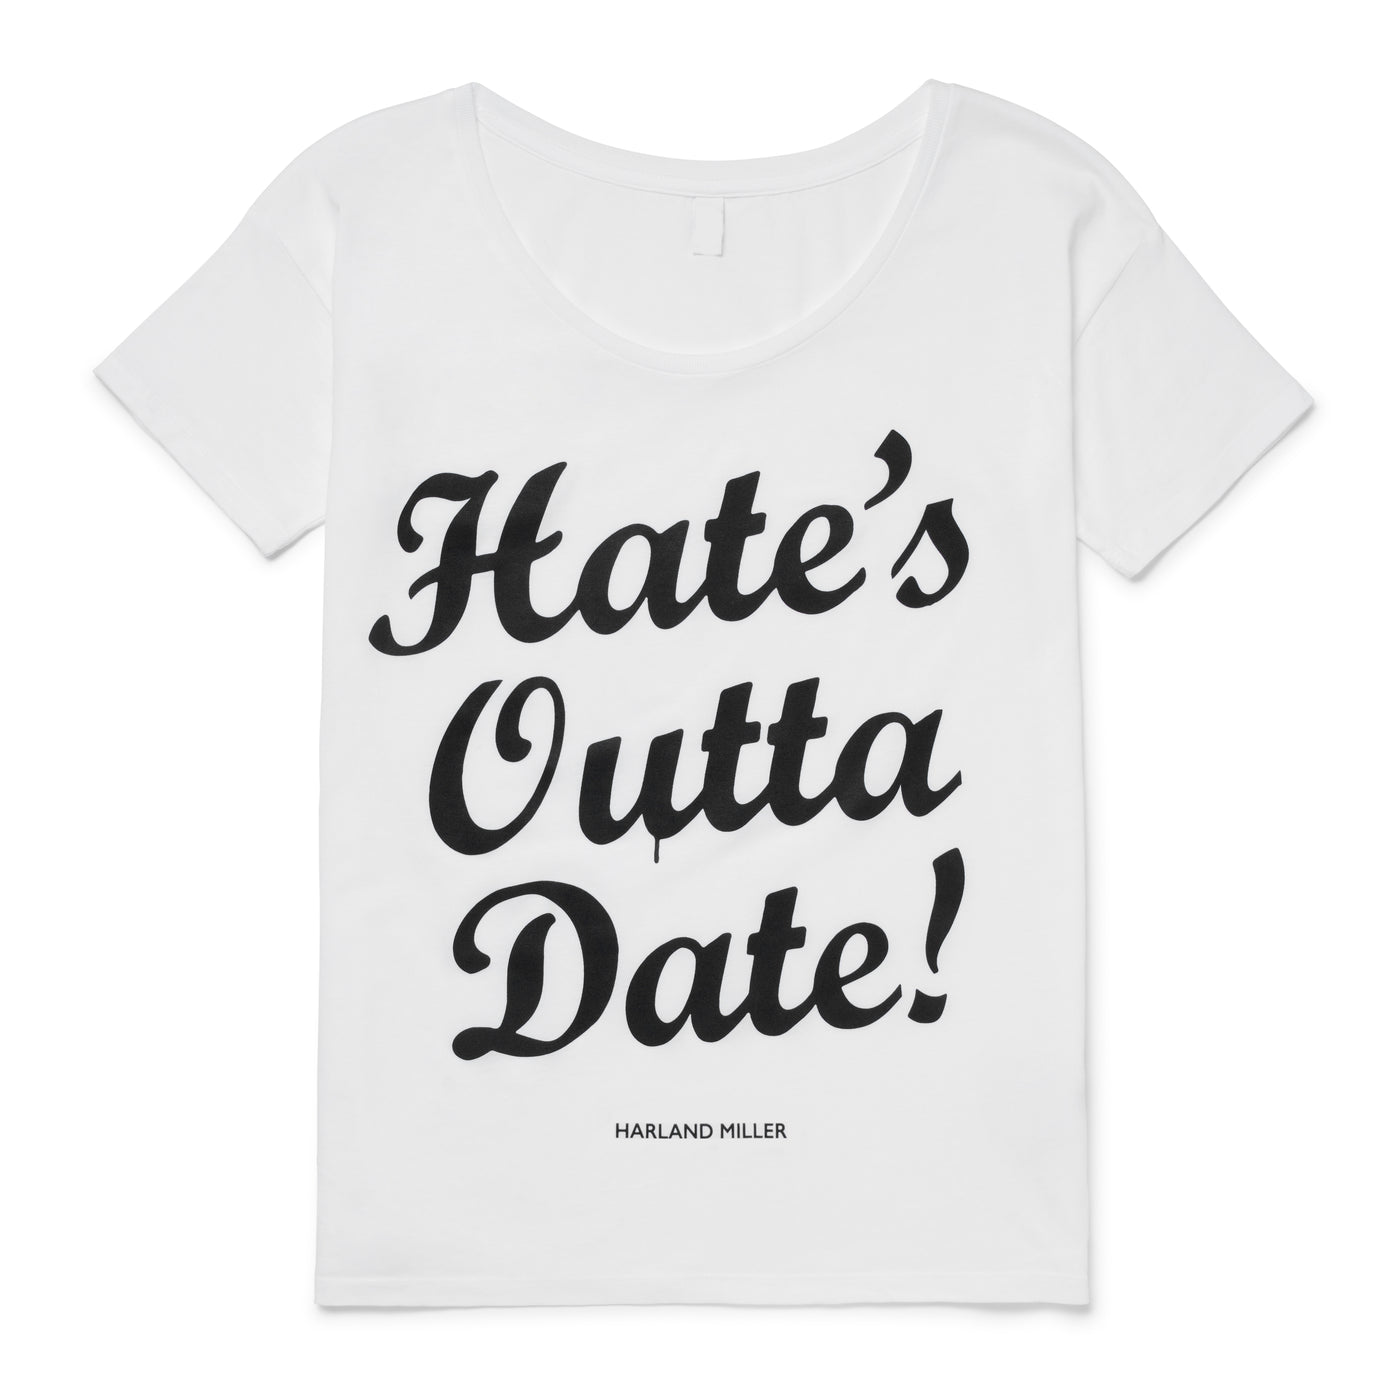 Harland Miller (loose neck) "Hates Outta Date" T Shirt